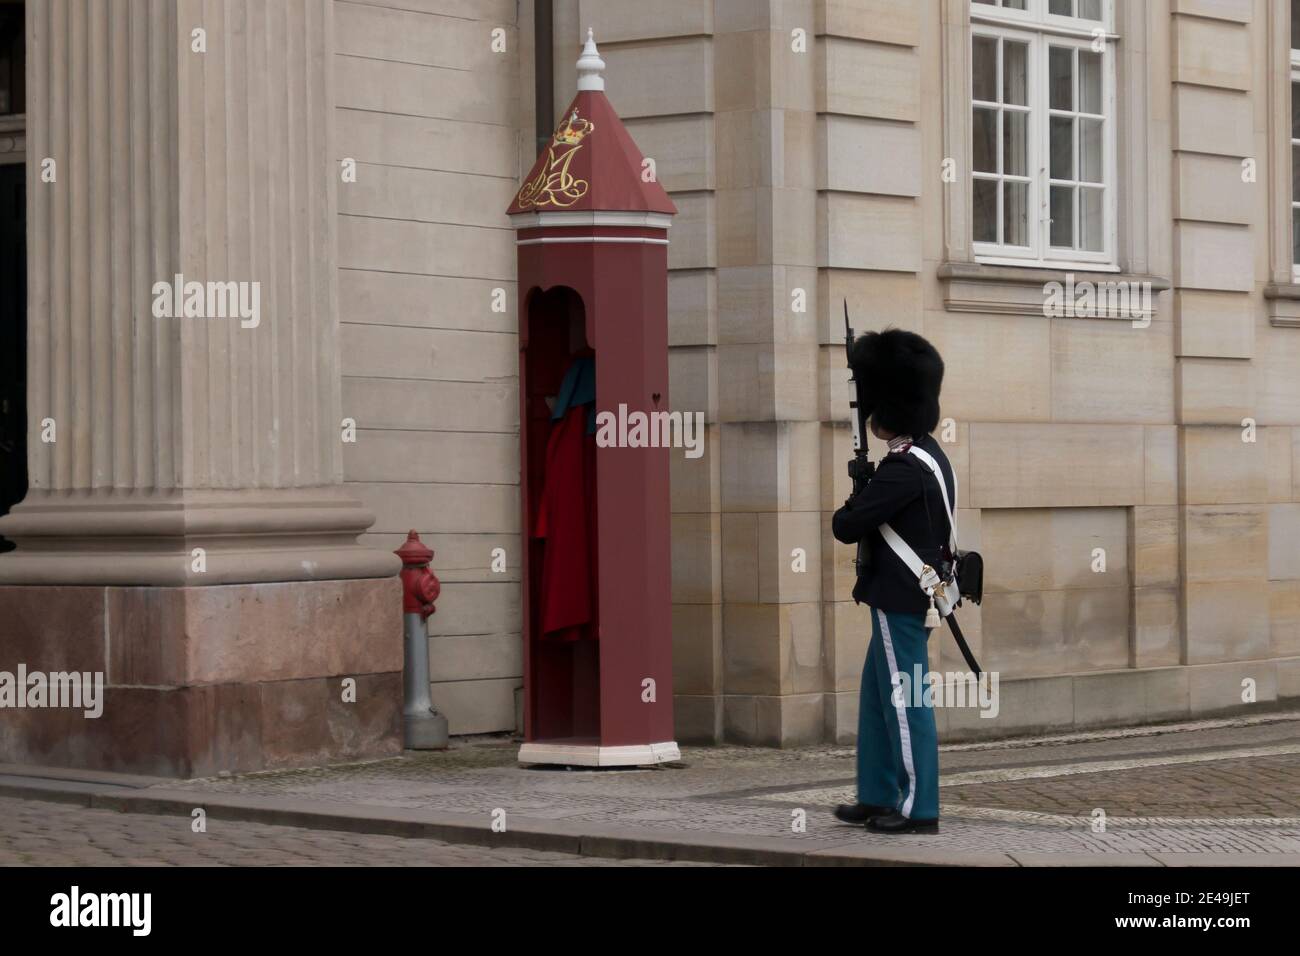 Copenhagen, Denmark - 12 Dec 2020: Members of Danish Royal Life guards marching in front of the Amalienborg Palace, home of the Danish royal family, d Stock Photo